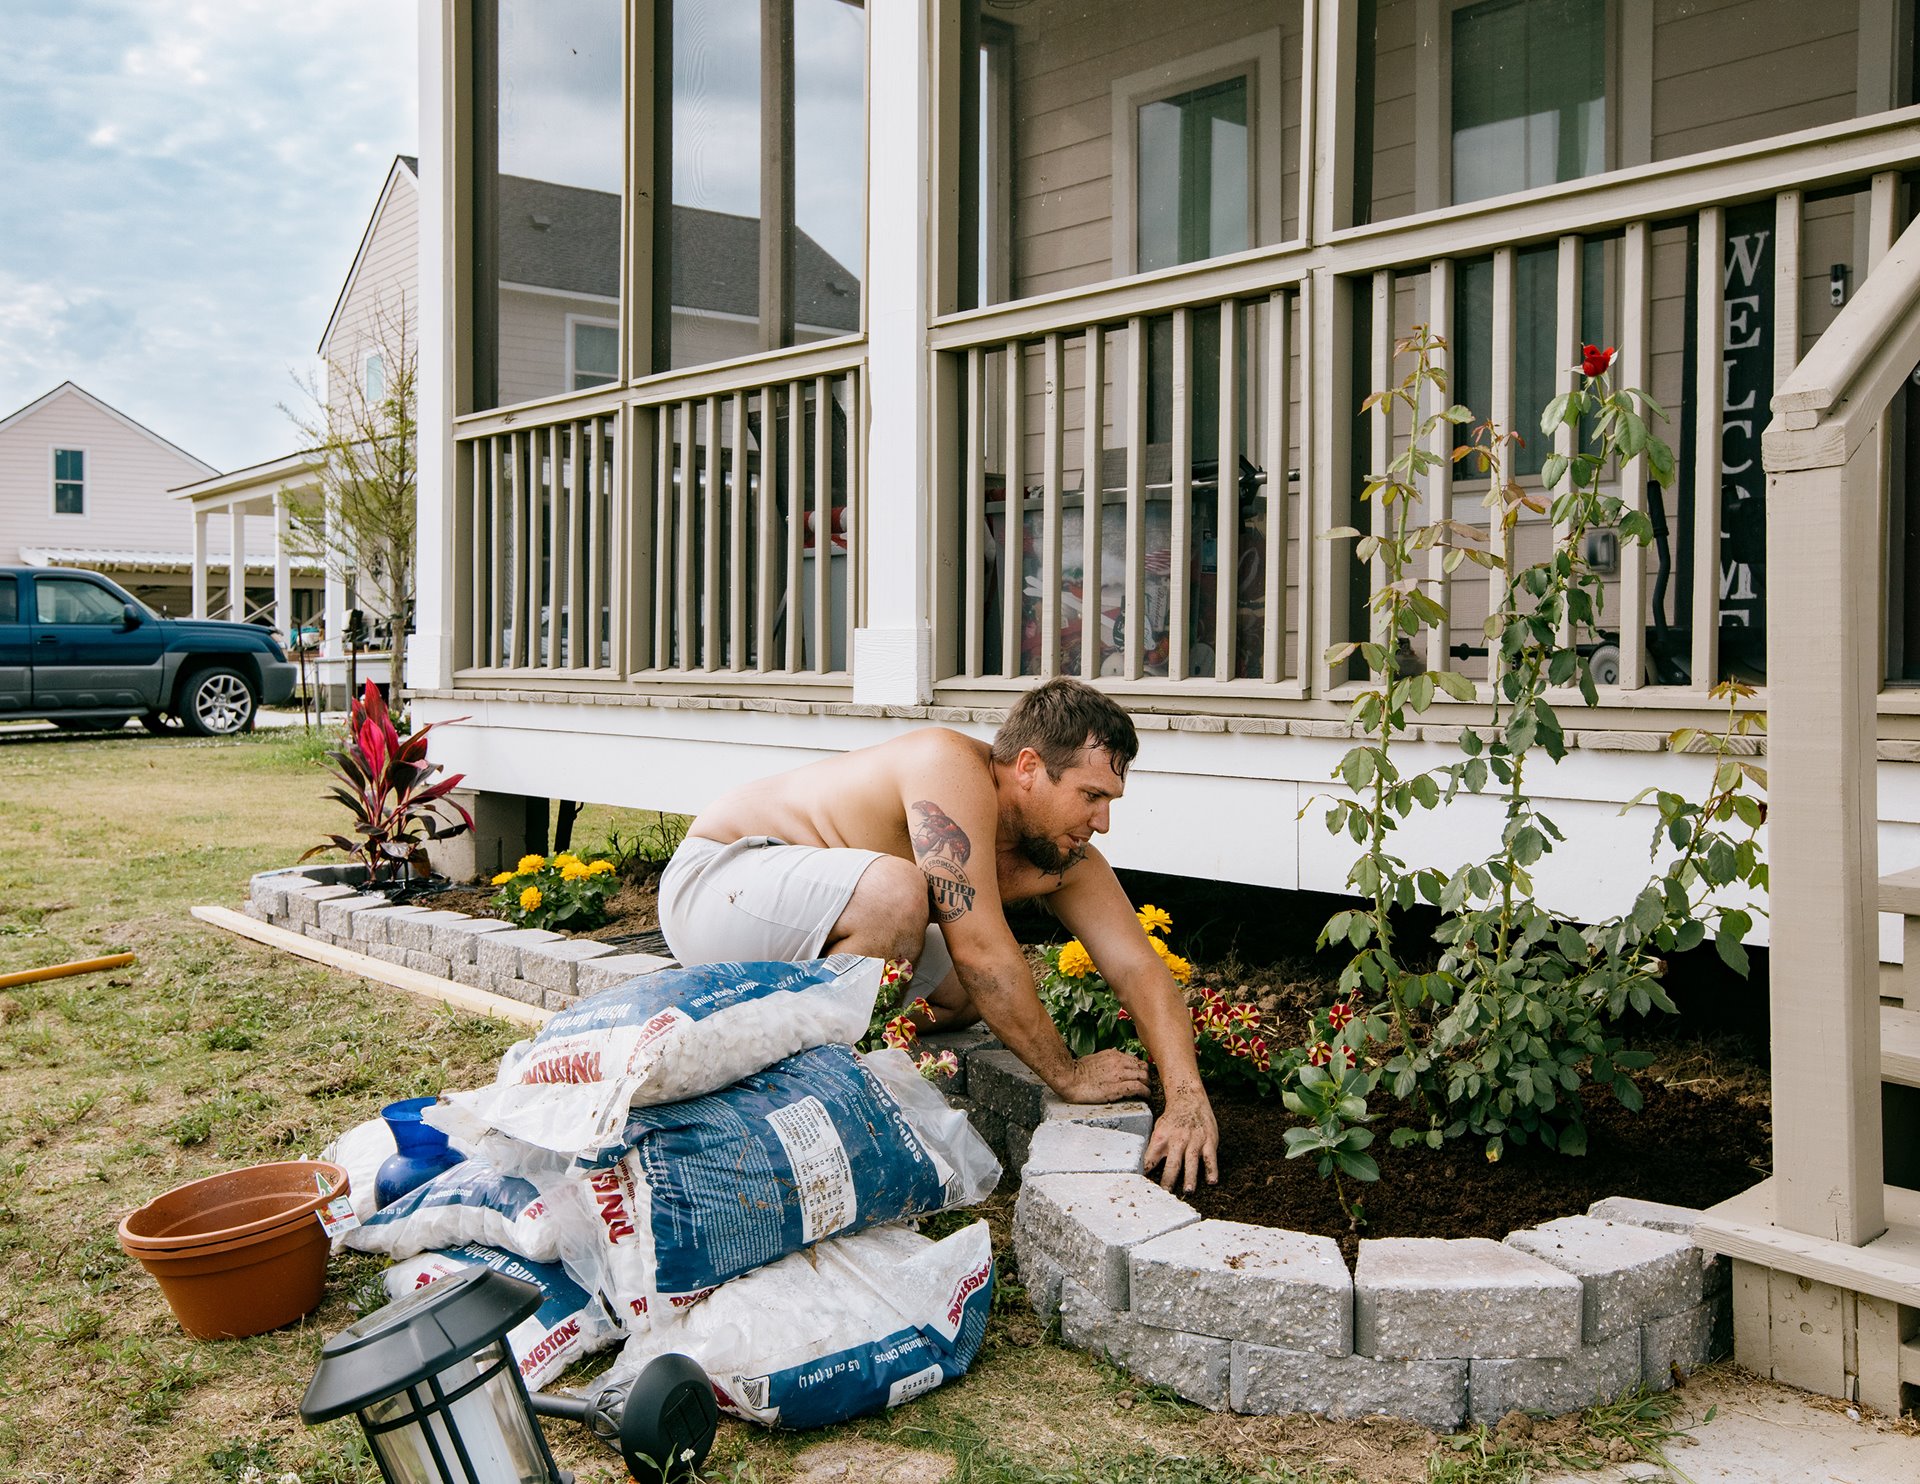 Jay plants flowers in the beds around his home in Gray, six months after moving in from Isle de Jean-Charles. Gray, Louisiana, United States.